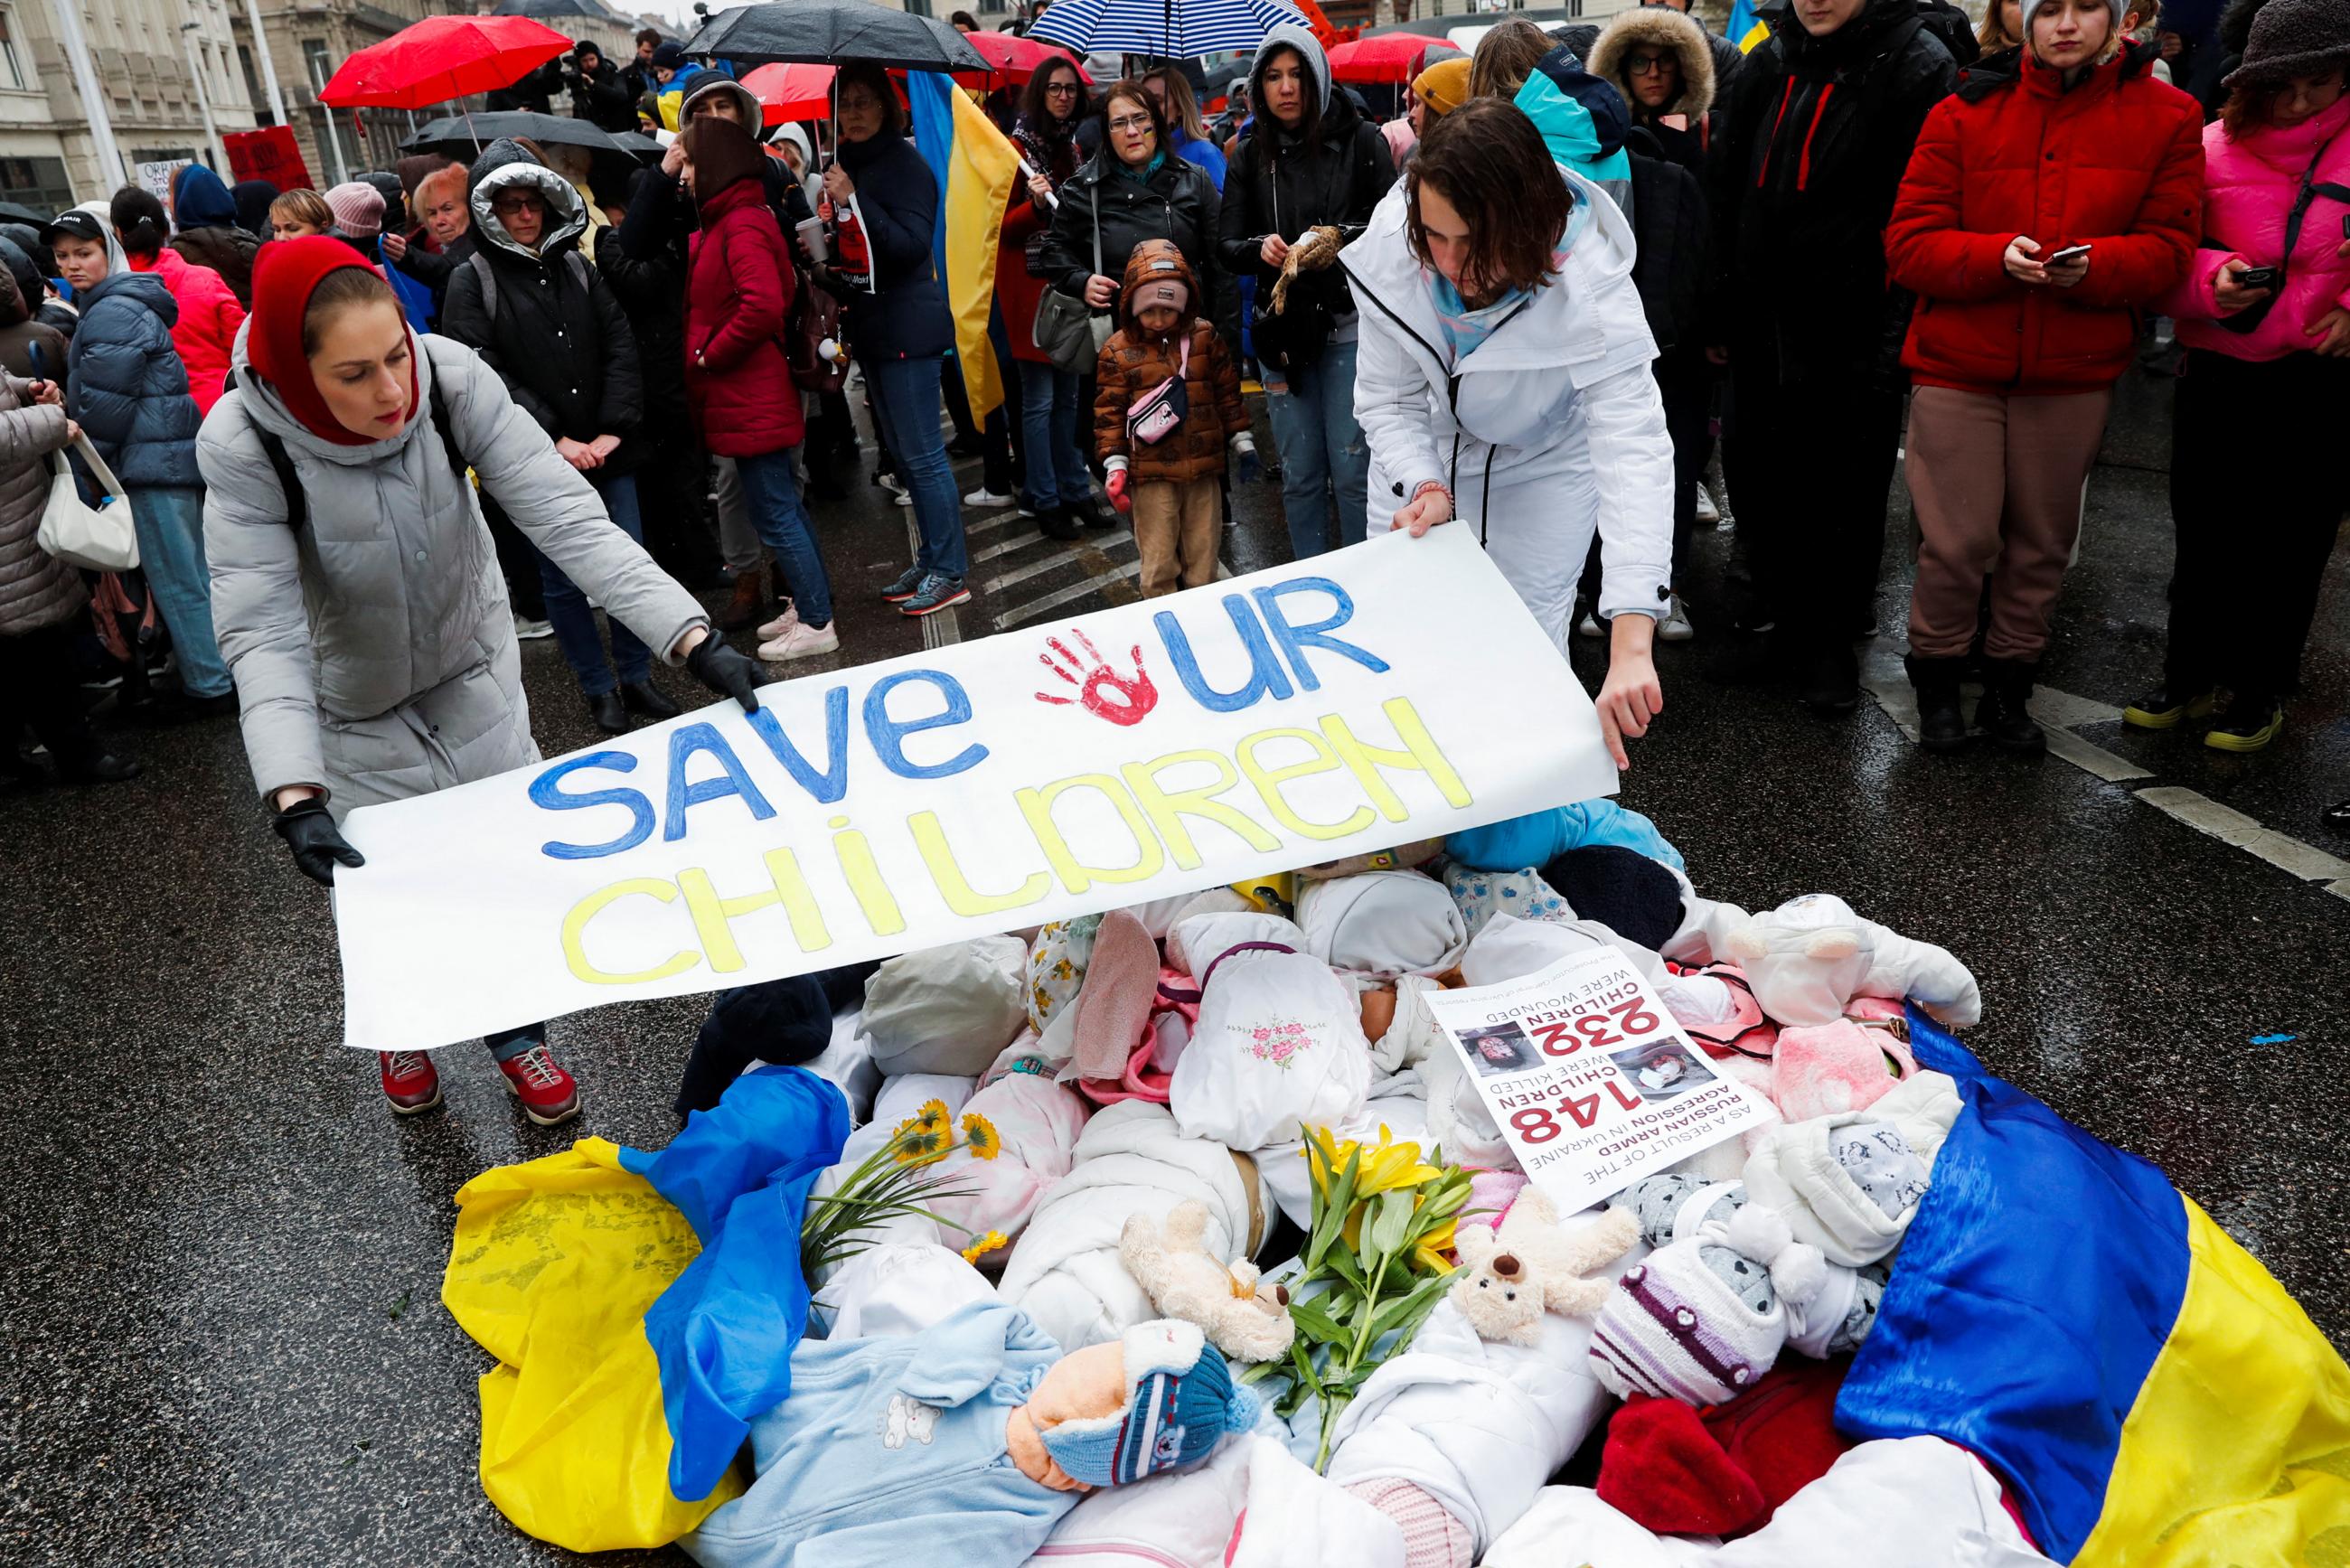 Ukrainian women who fled Russia's invasion of Ukraine carry dummy babies symbolizing children who were killed in the conflict and a sign that reads "Save Our Children", during a Mothers March in Budapest, Hungary, April 2, 2022